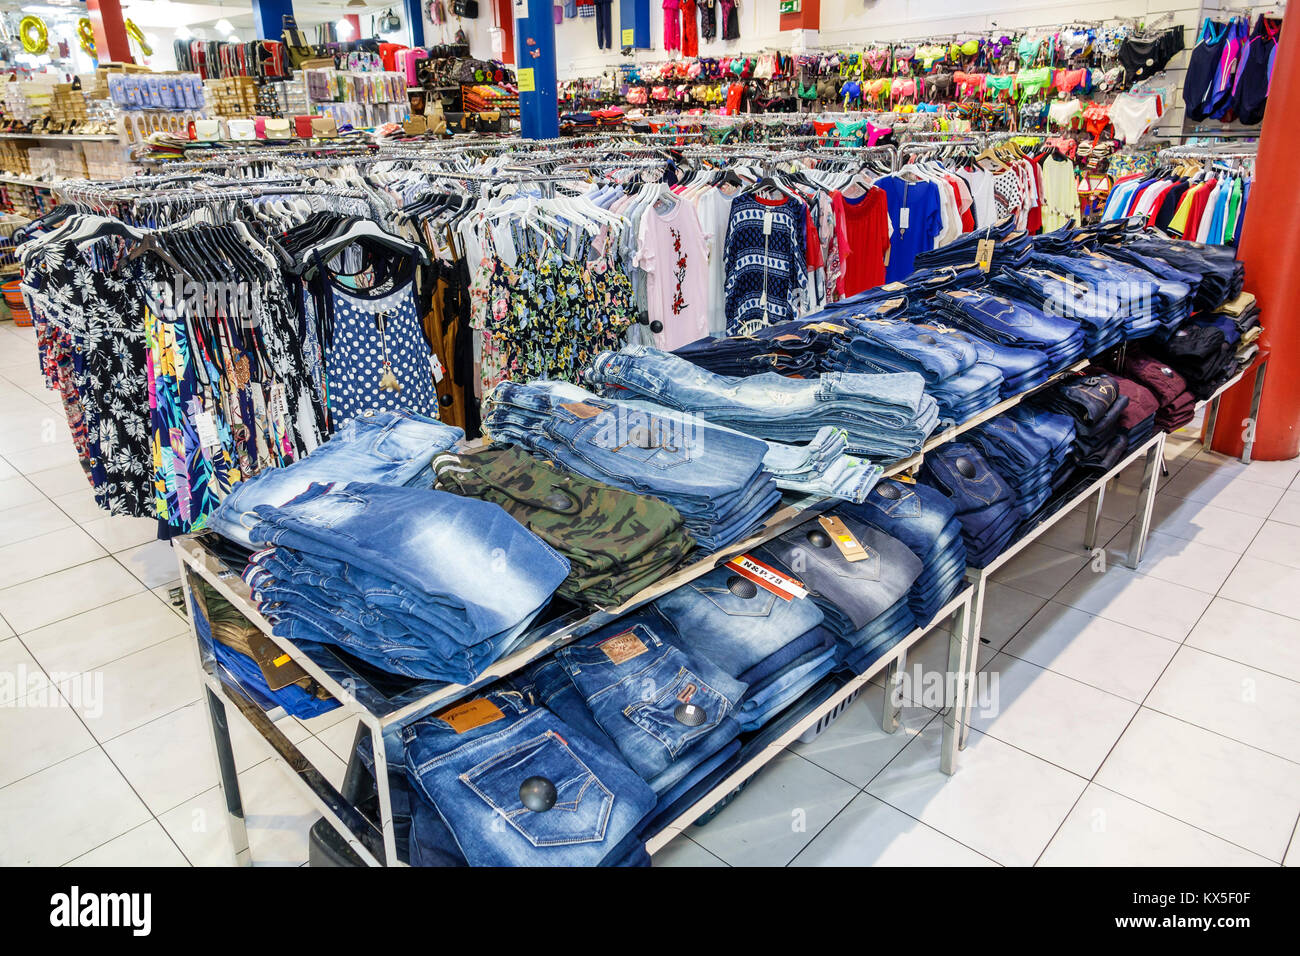 Coimbra Portugal,historic center,downtown,store,clothing,jeans,shopping  shopper shoppers shop shops market markets marketplace buying  selling,retail s Stock Photo - Alamy